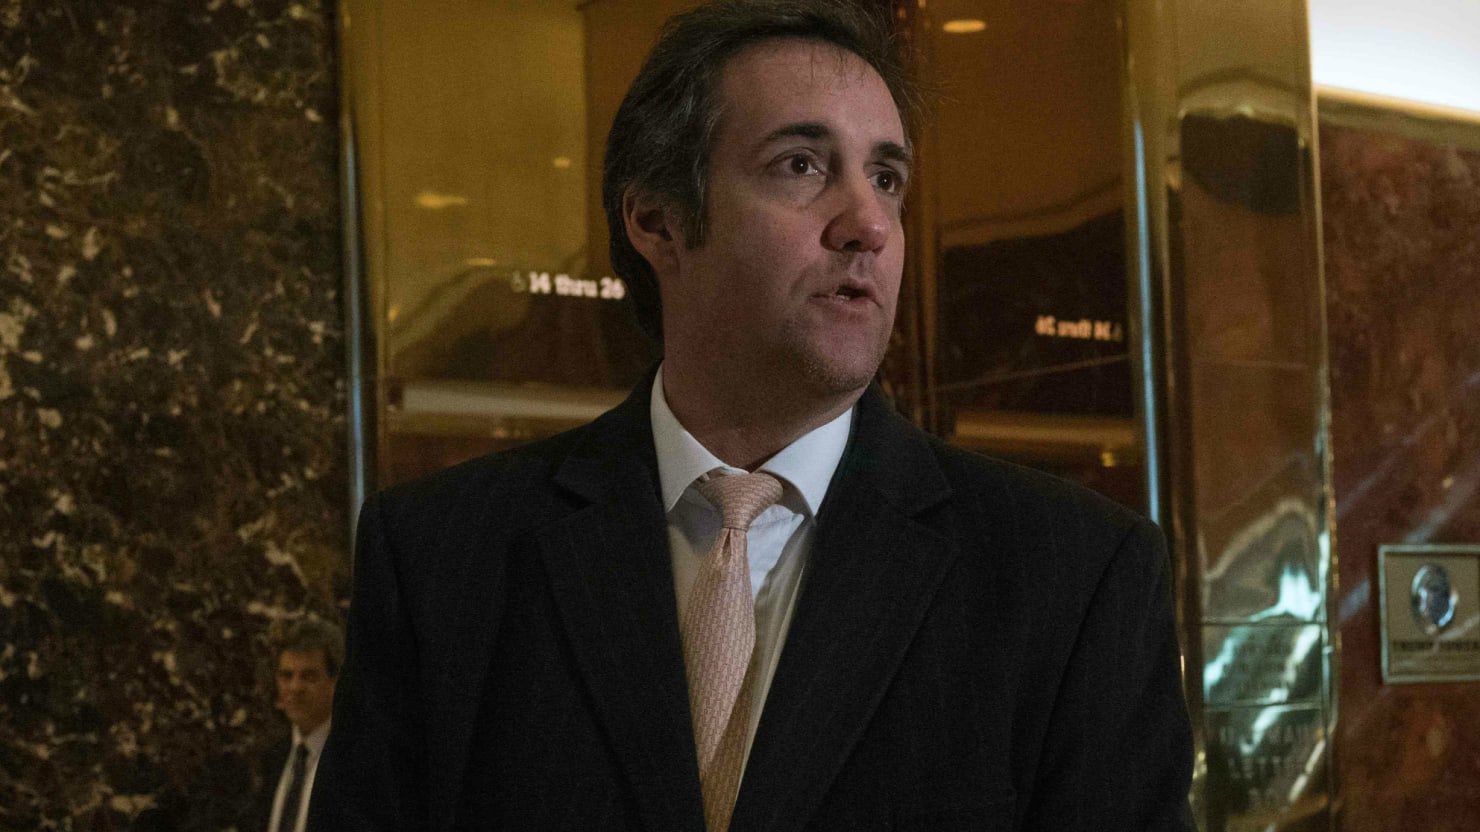 Trump Attorney We Did Talk Moscow Tower Deal During The Campaign